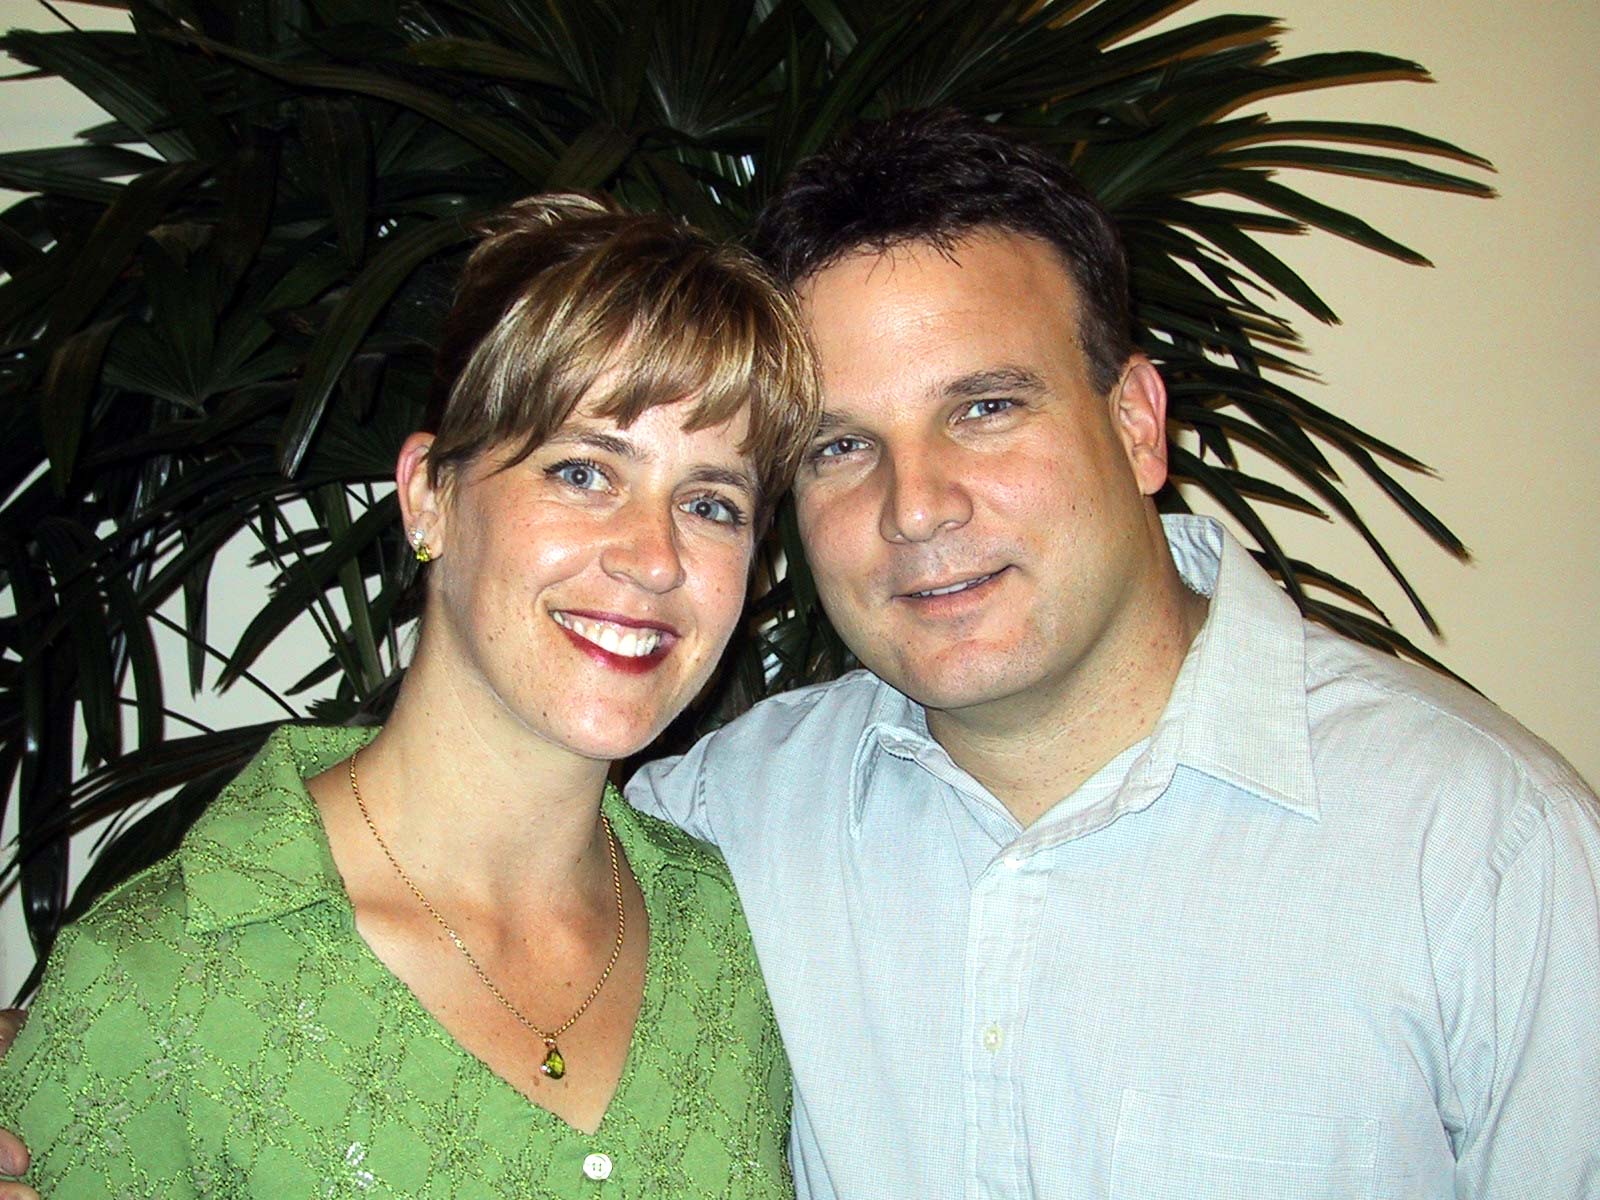 Brian Burkholder, DC and Kirsten Krause, DC of Discover Chiropractic - Bothell